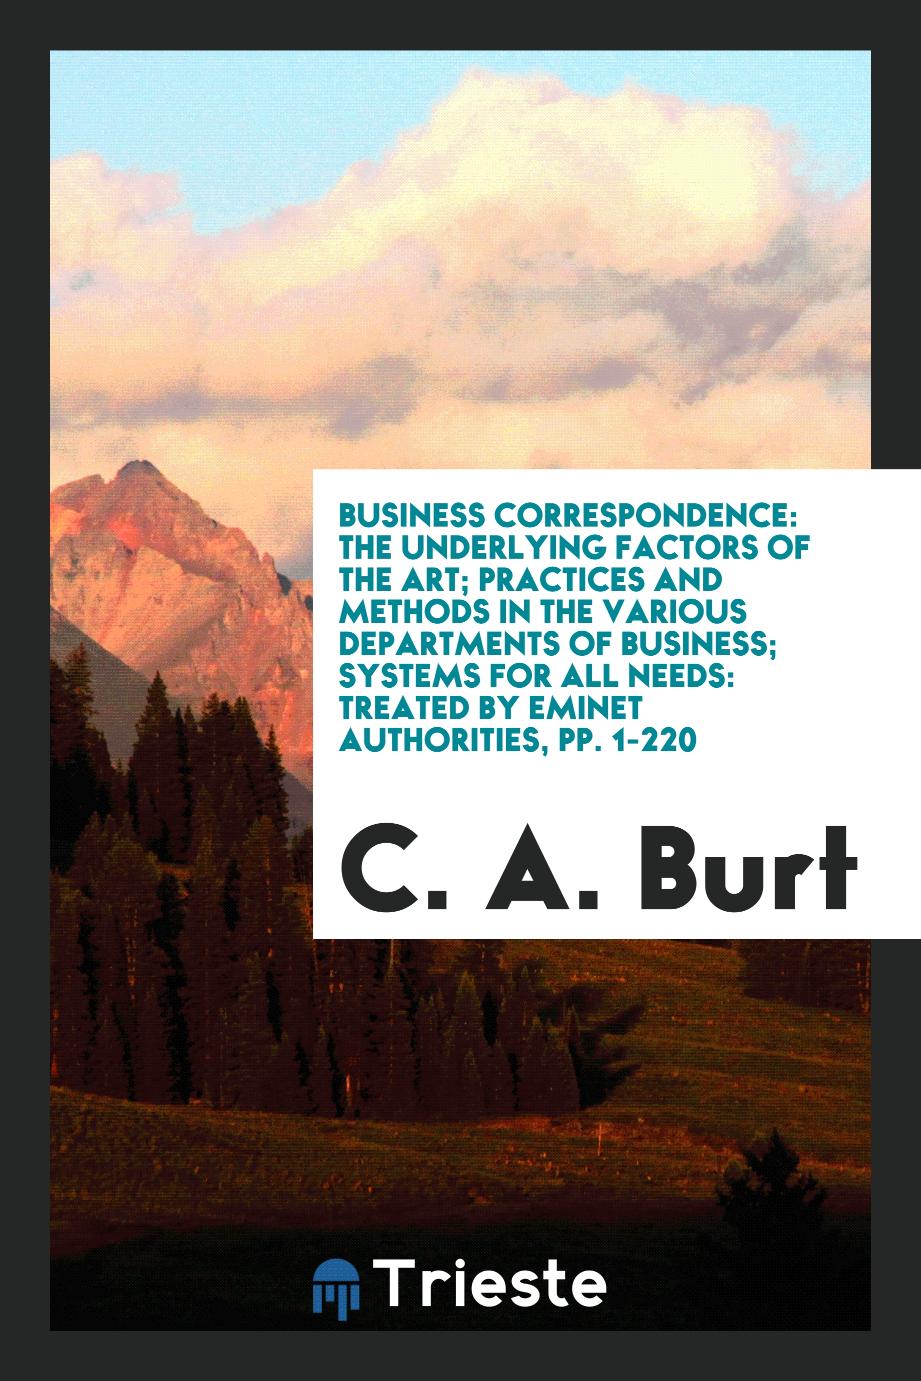 Business Correspondence: The Underlying Factors of the Art; Practices and Methods in the Various Departments of Business; Systems for All Needs: Treated by Eminet Authorities, pp. 1-220